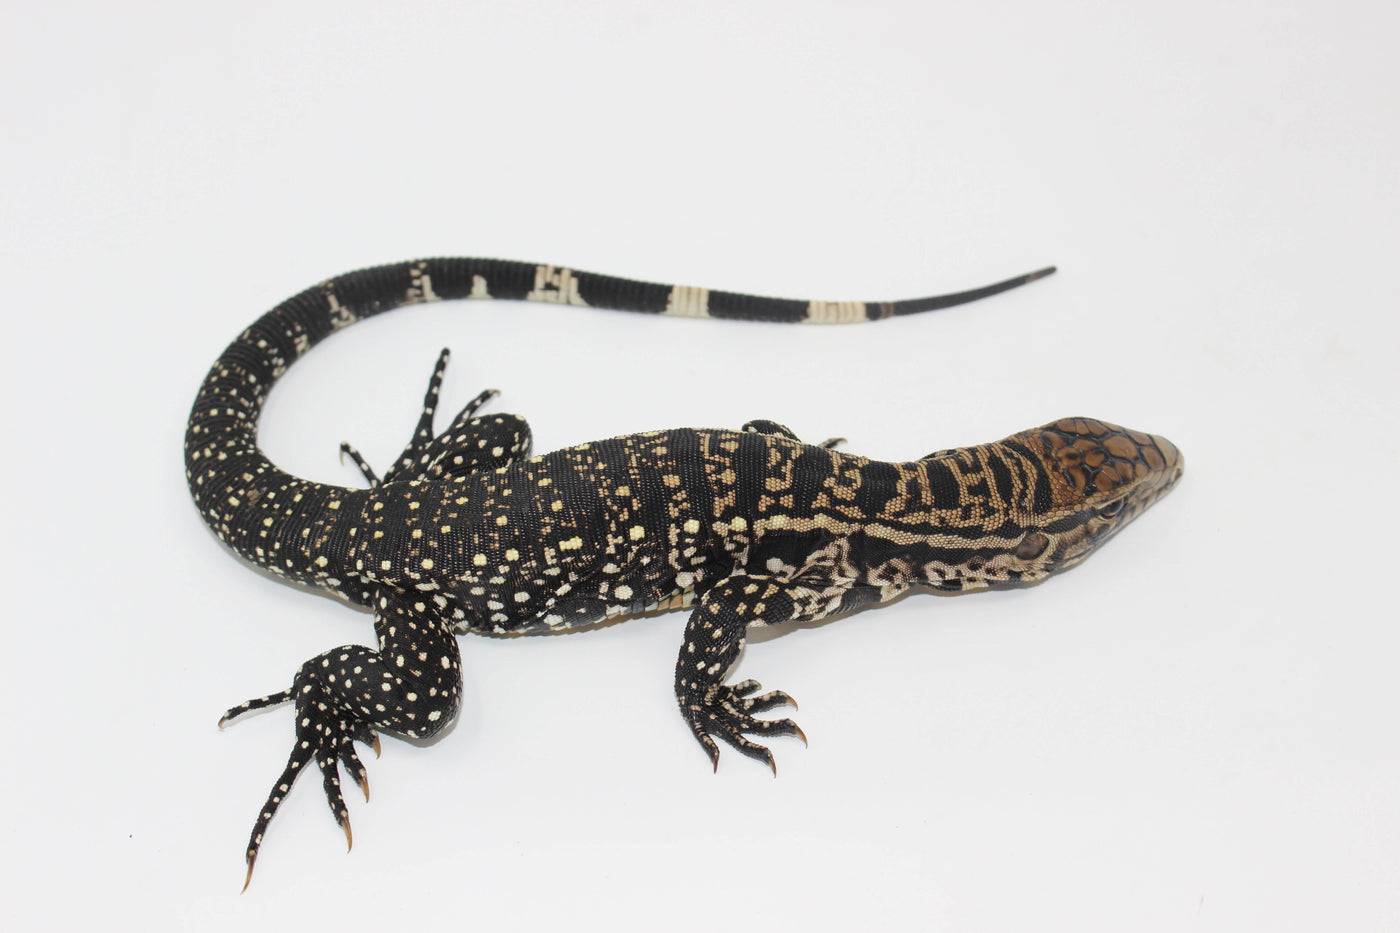 argentine black and white tegu for sale, buy reptiles online